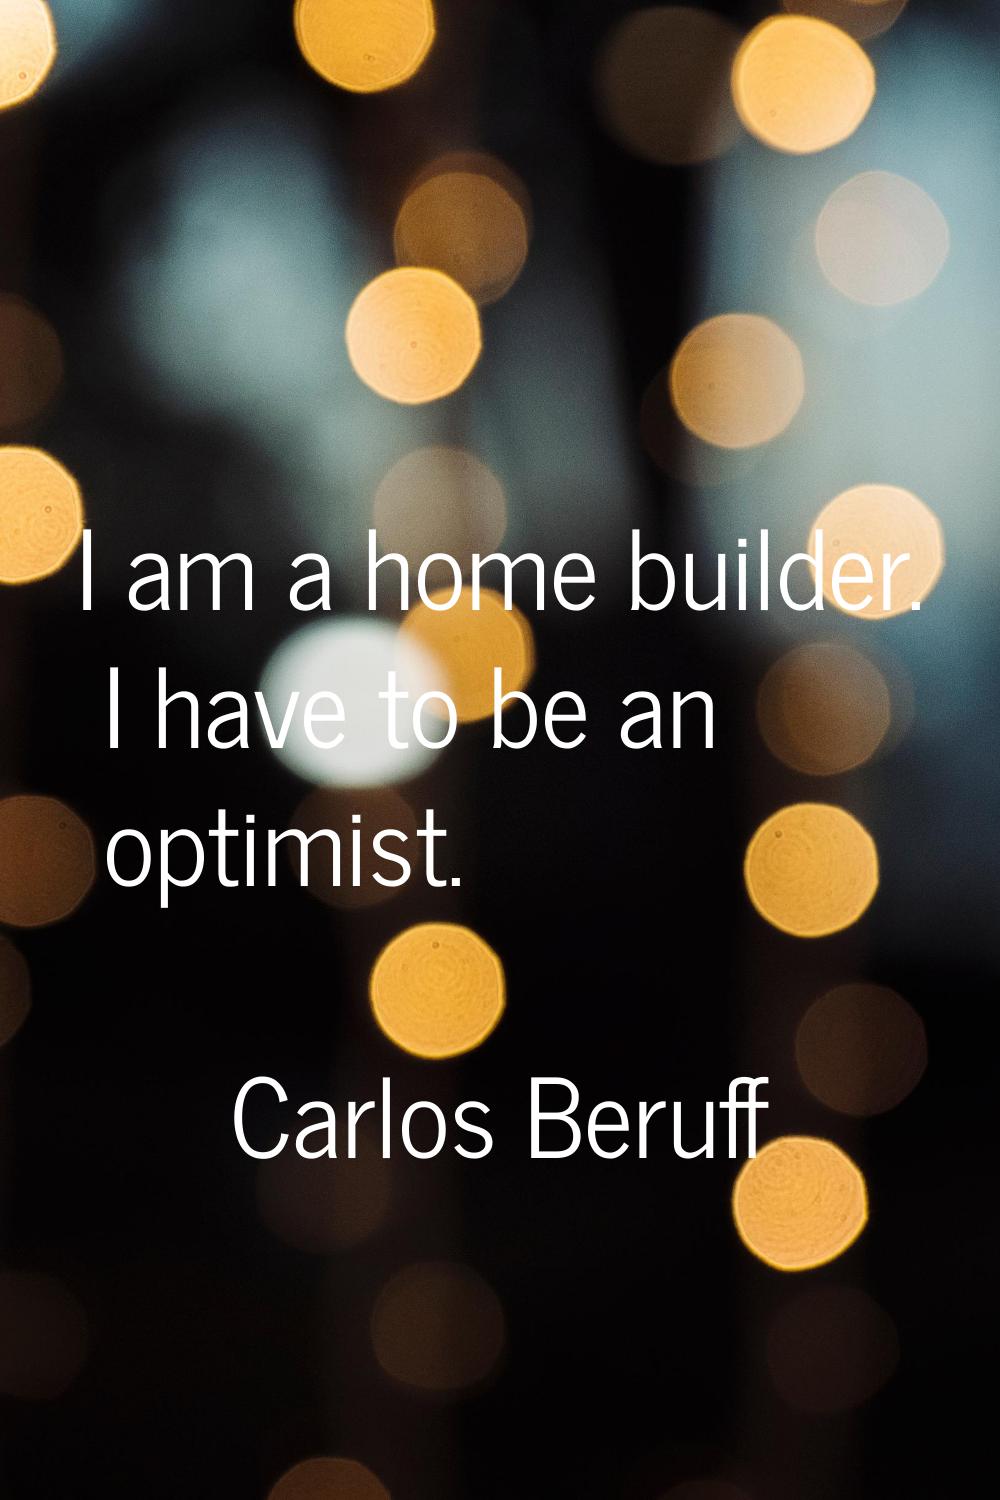 I am a home builder. I have to be an optimist.